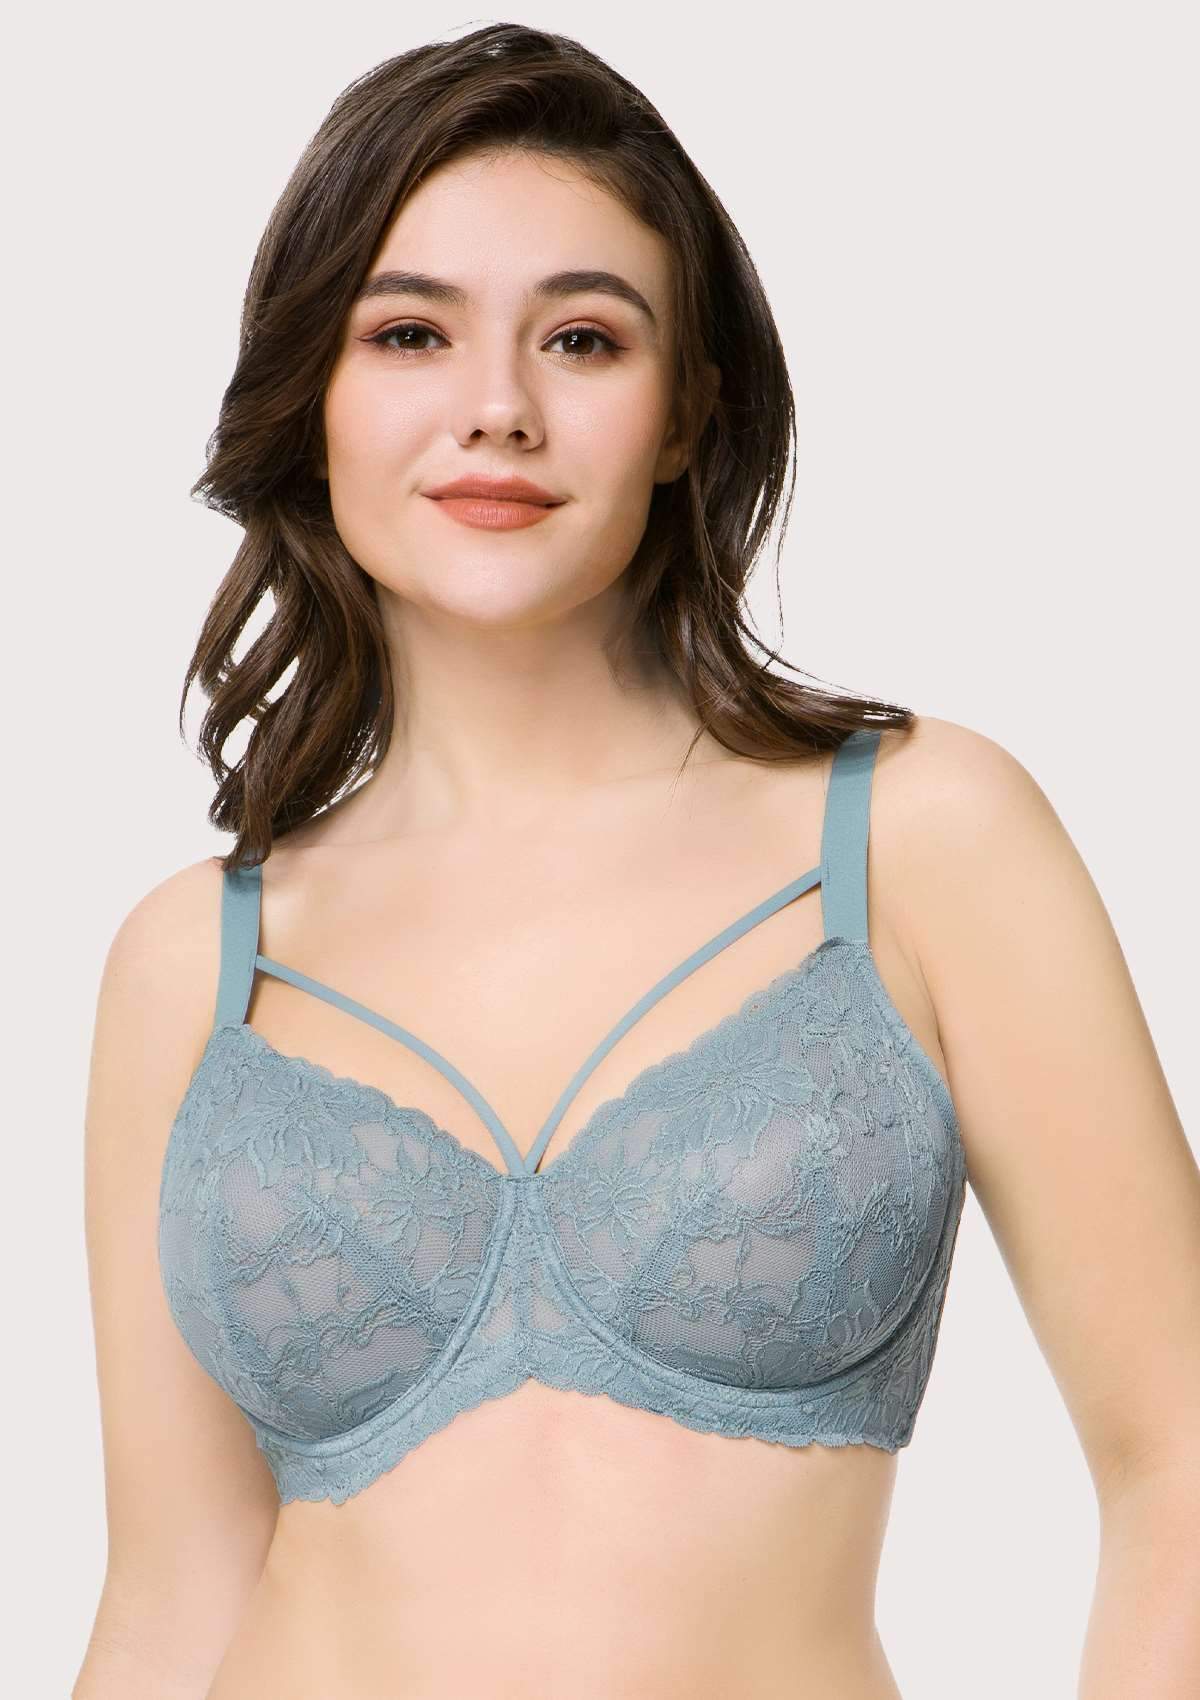 HSIA Pretty In Petals Unlined Lace Bra: Comfortable And Supportive Bra - Crystal Blue / 32 / C